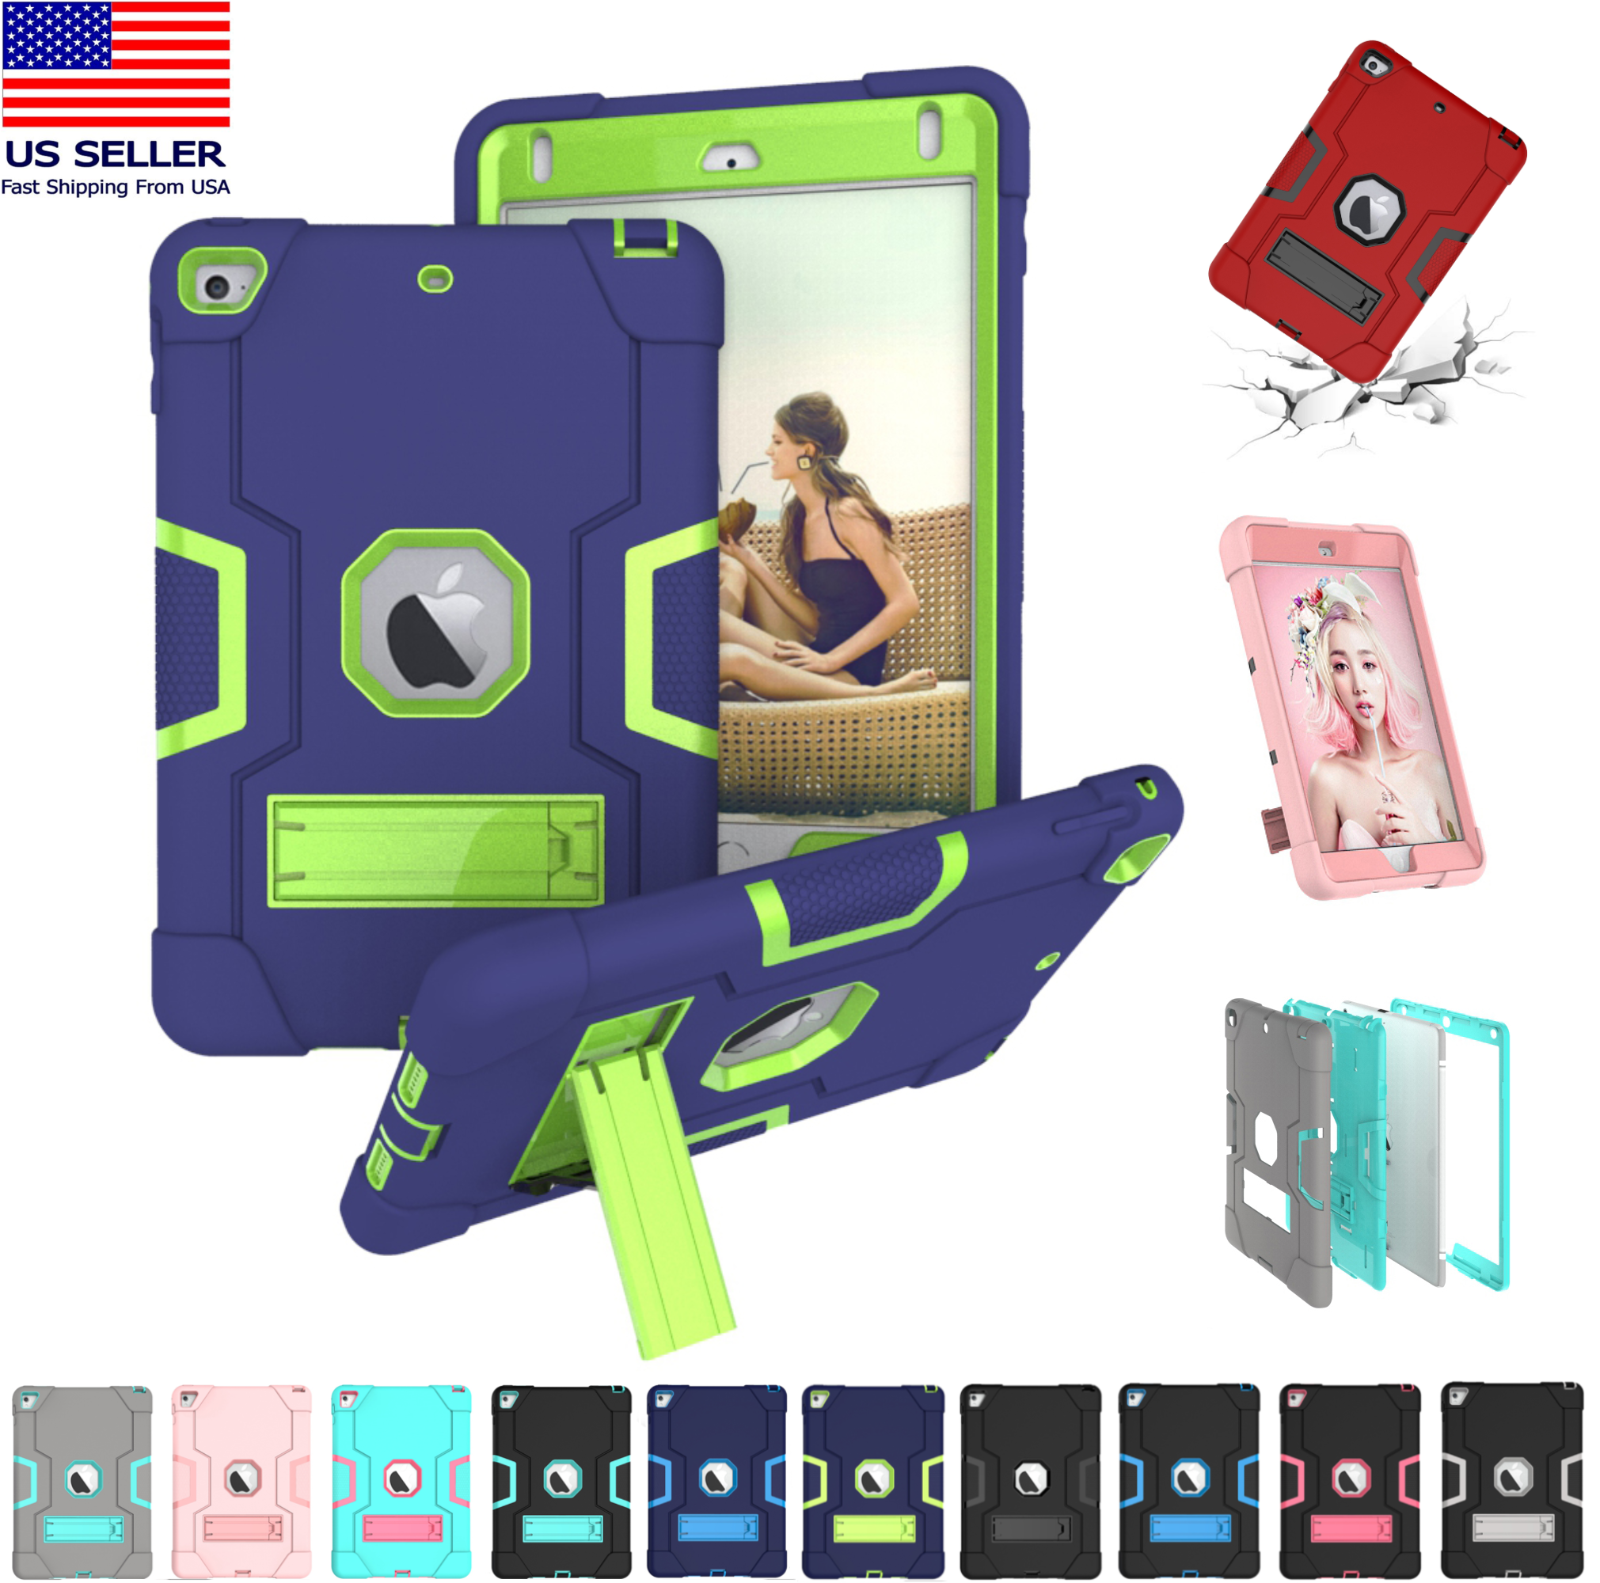 Shockproof Heavy Duty Hard Case Stand Cover For Ipad 7th Gen Air Mini 1 2 3 4 5